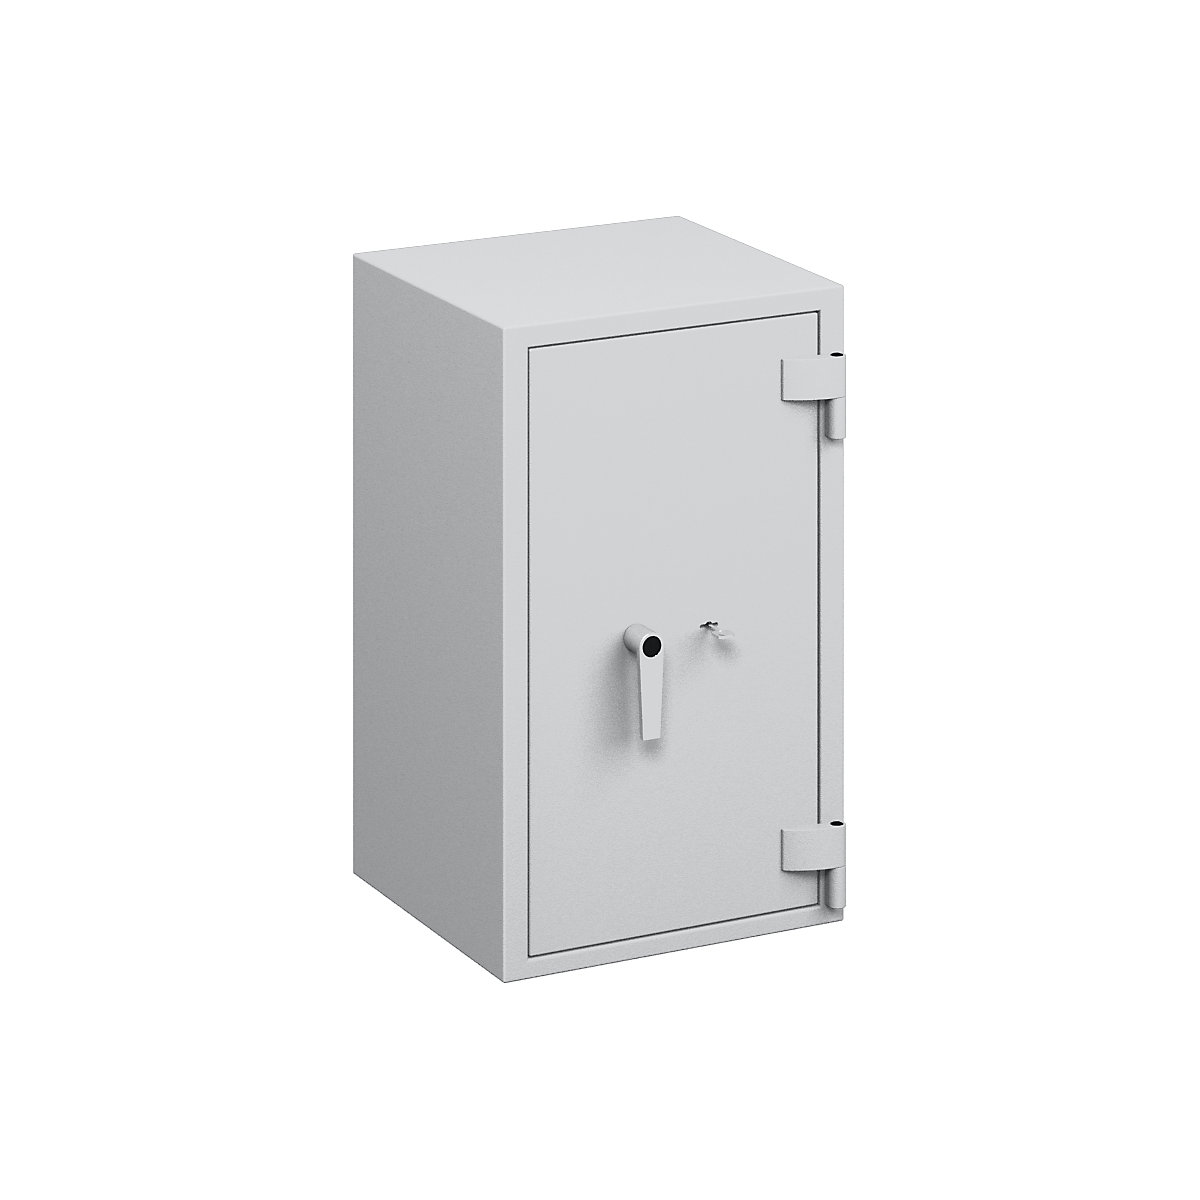 Fire resistant safety cabinet, VDMA B, S2, S 60 P, HxWxD 775 x 463 x 427 mm-11